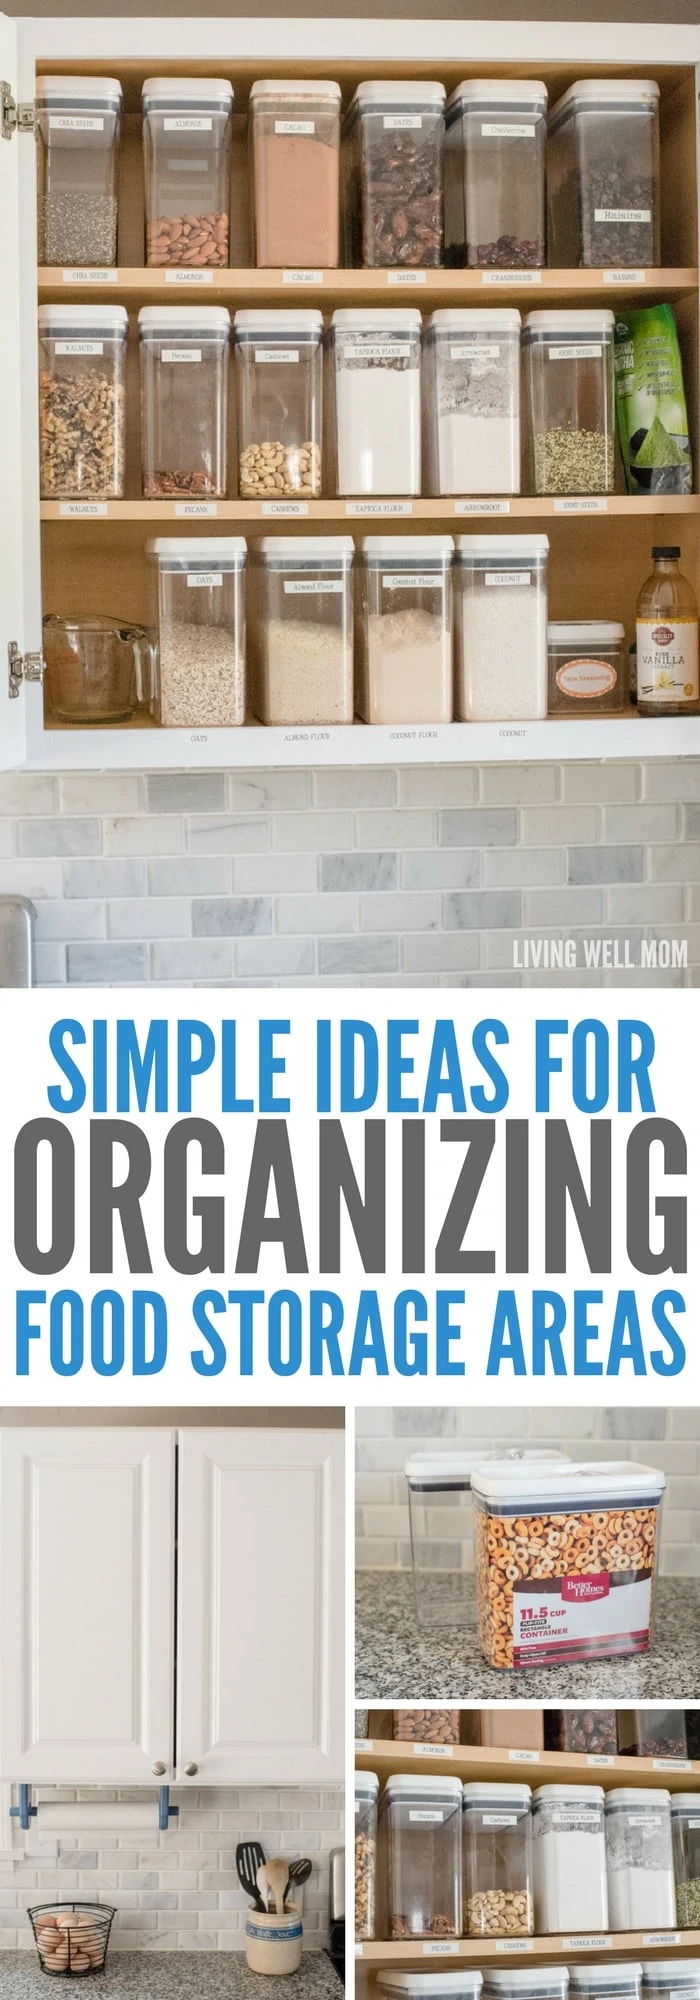 Tired of losing track of what's in your kitchen food cupboards? These two simple tips that will transform how you organize food storage areas & make life so much easier!